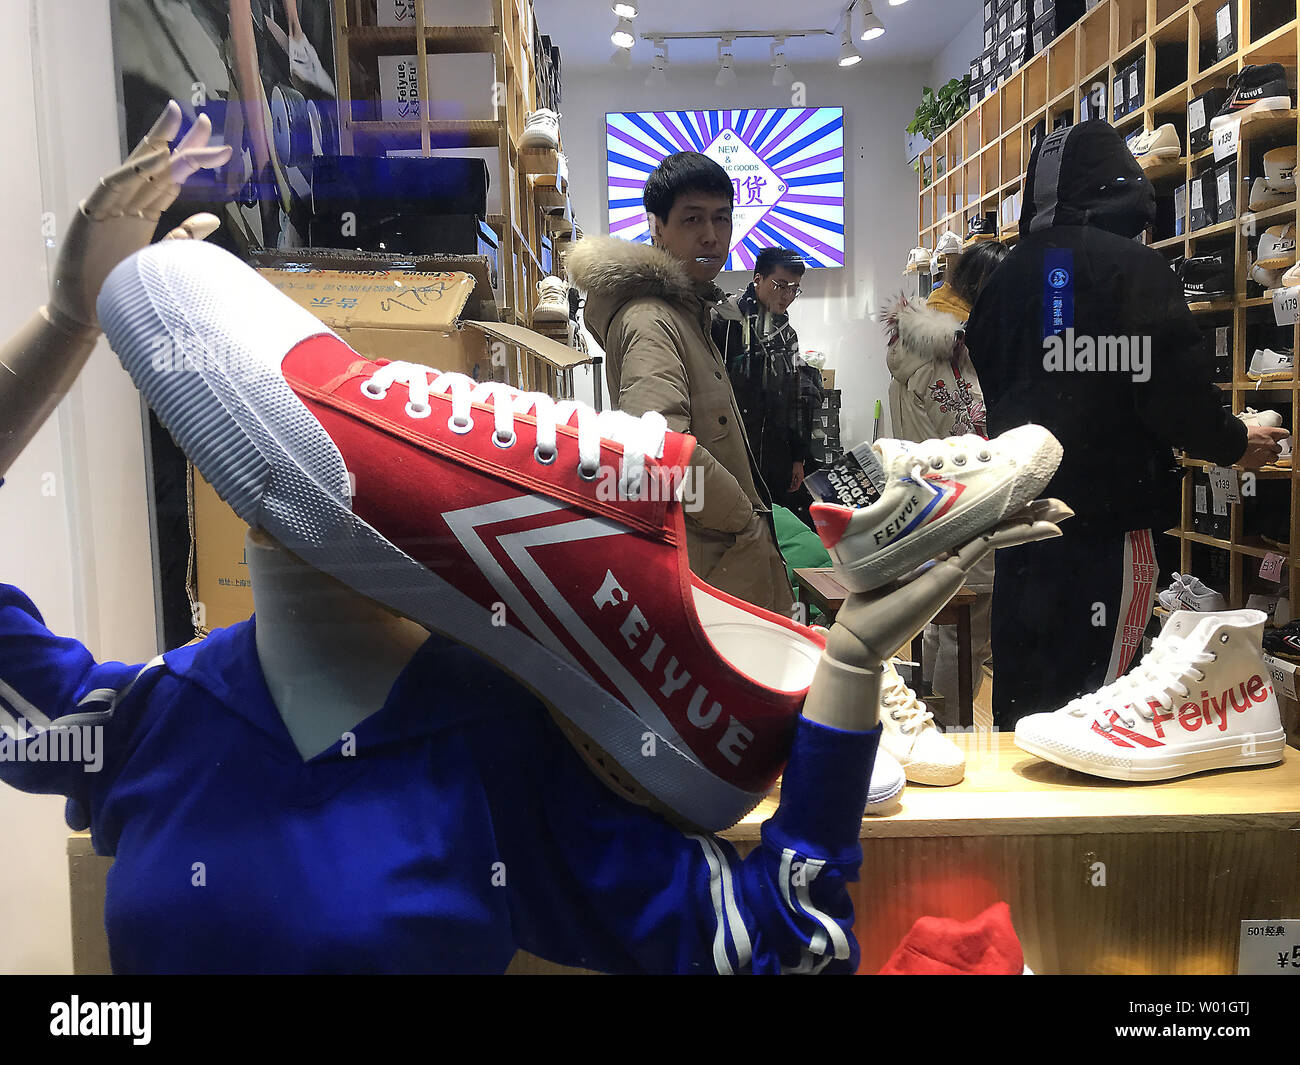 Chinese shop for shoes, domestically made but closely resembling U.S.  Converse, in Beijing on February 18, 2019. Many of the U.S.'s complaints  against China involve intellectual property rights (IPR), copyright and  patent